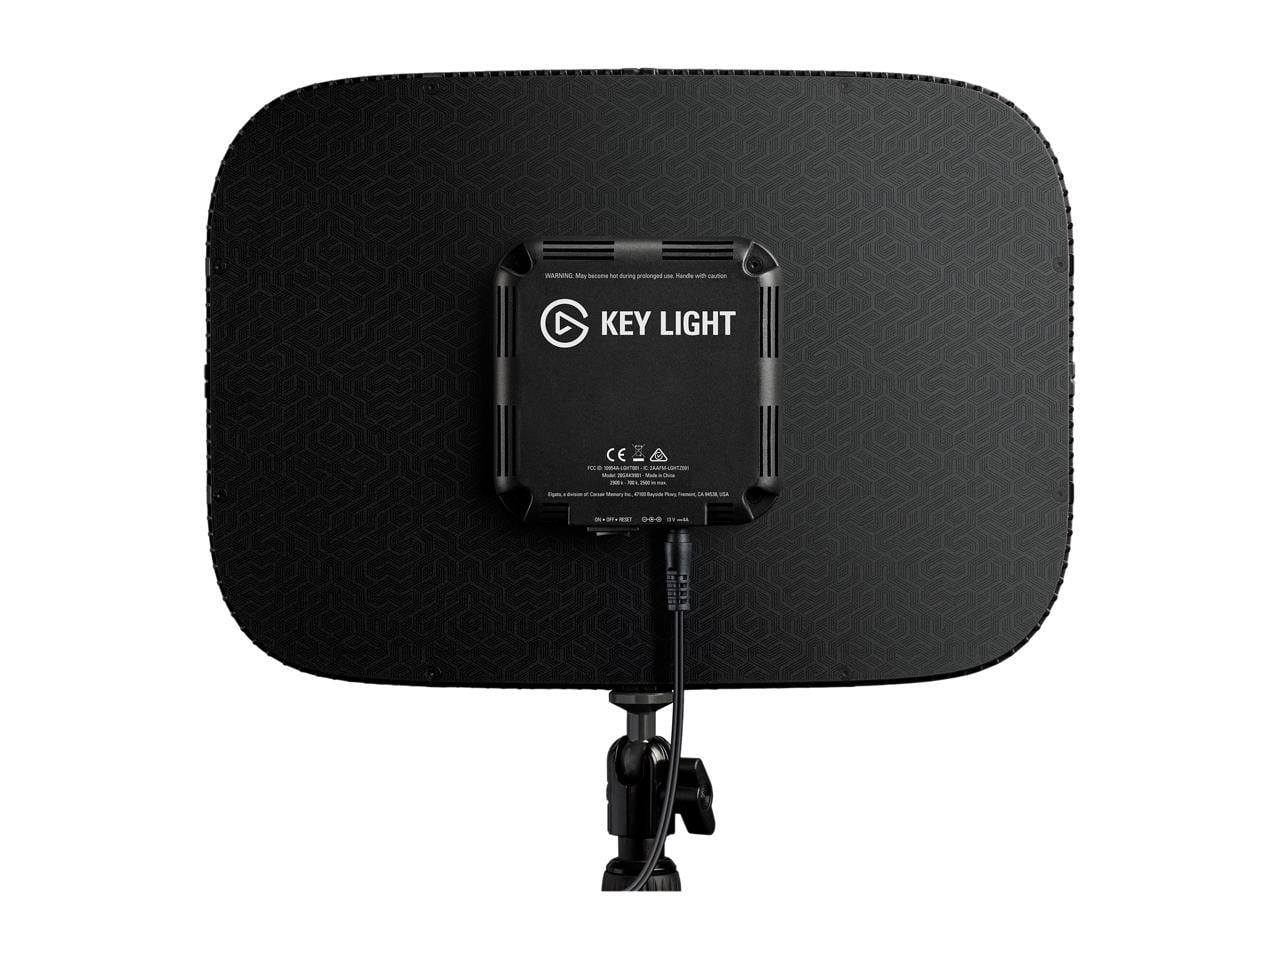  Elgato Key Light Air - Professional 1400 lumens Desk Light for  Streaming, Broadcasting, Home Office and Video Conferencing, Temperature  and Brightness app-adjustable on Mac, PC, iOS, Android : Musical Instruments